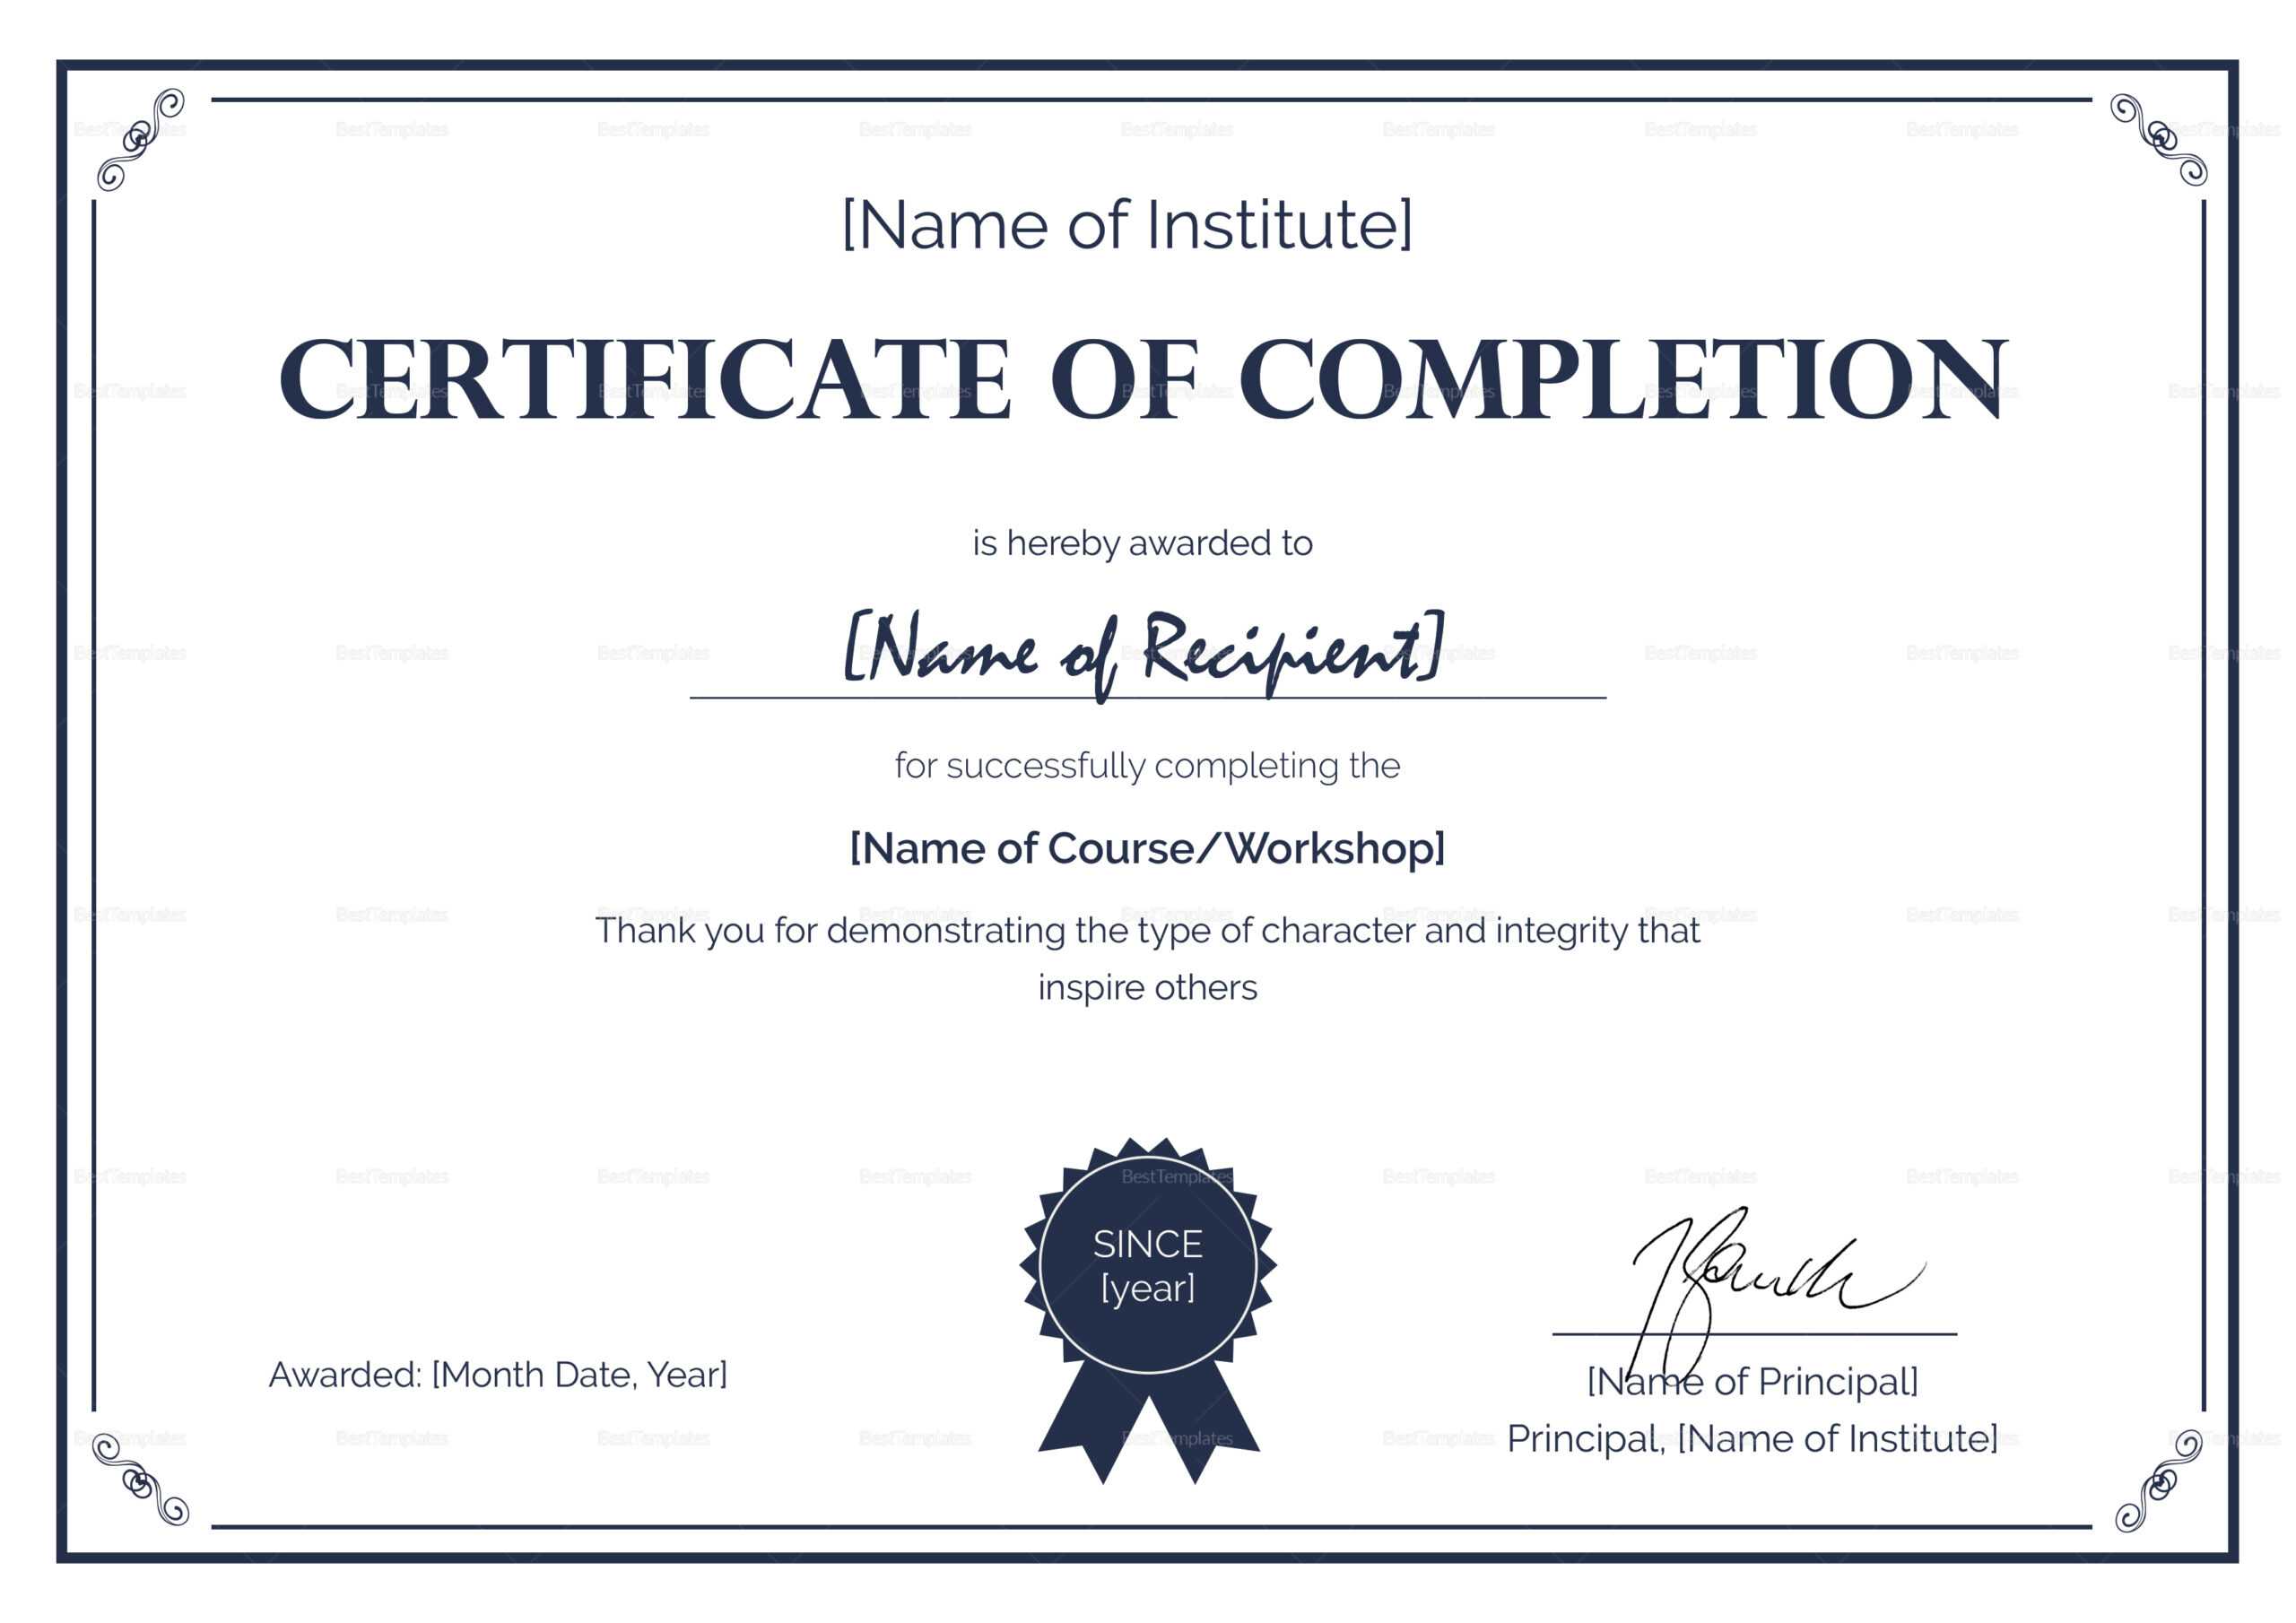 Formal Completion Certificate Template For Certificate Of Completion Word Template